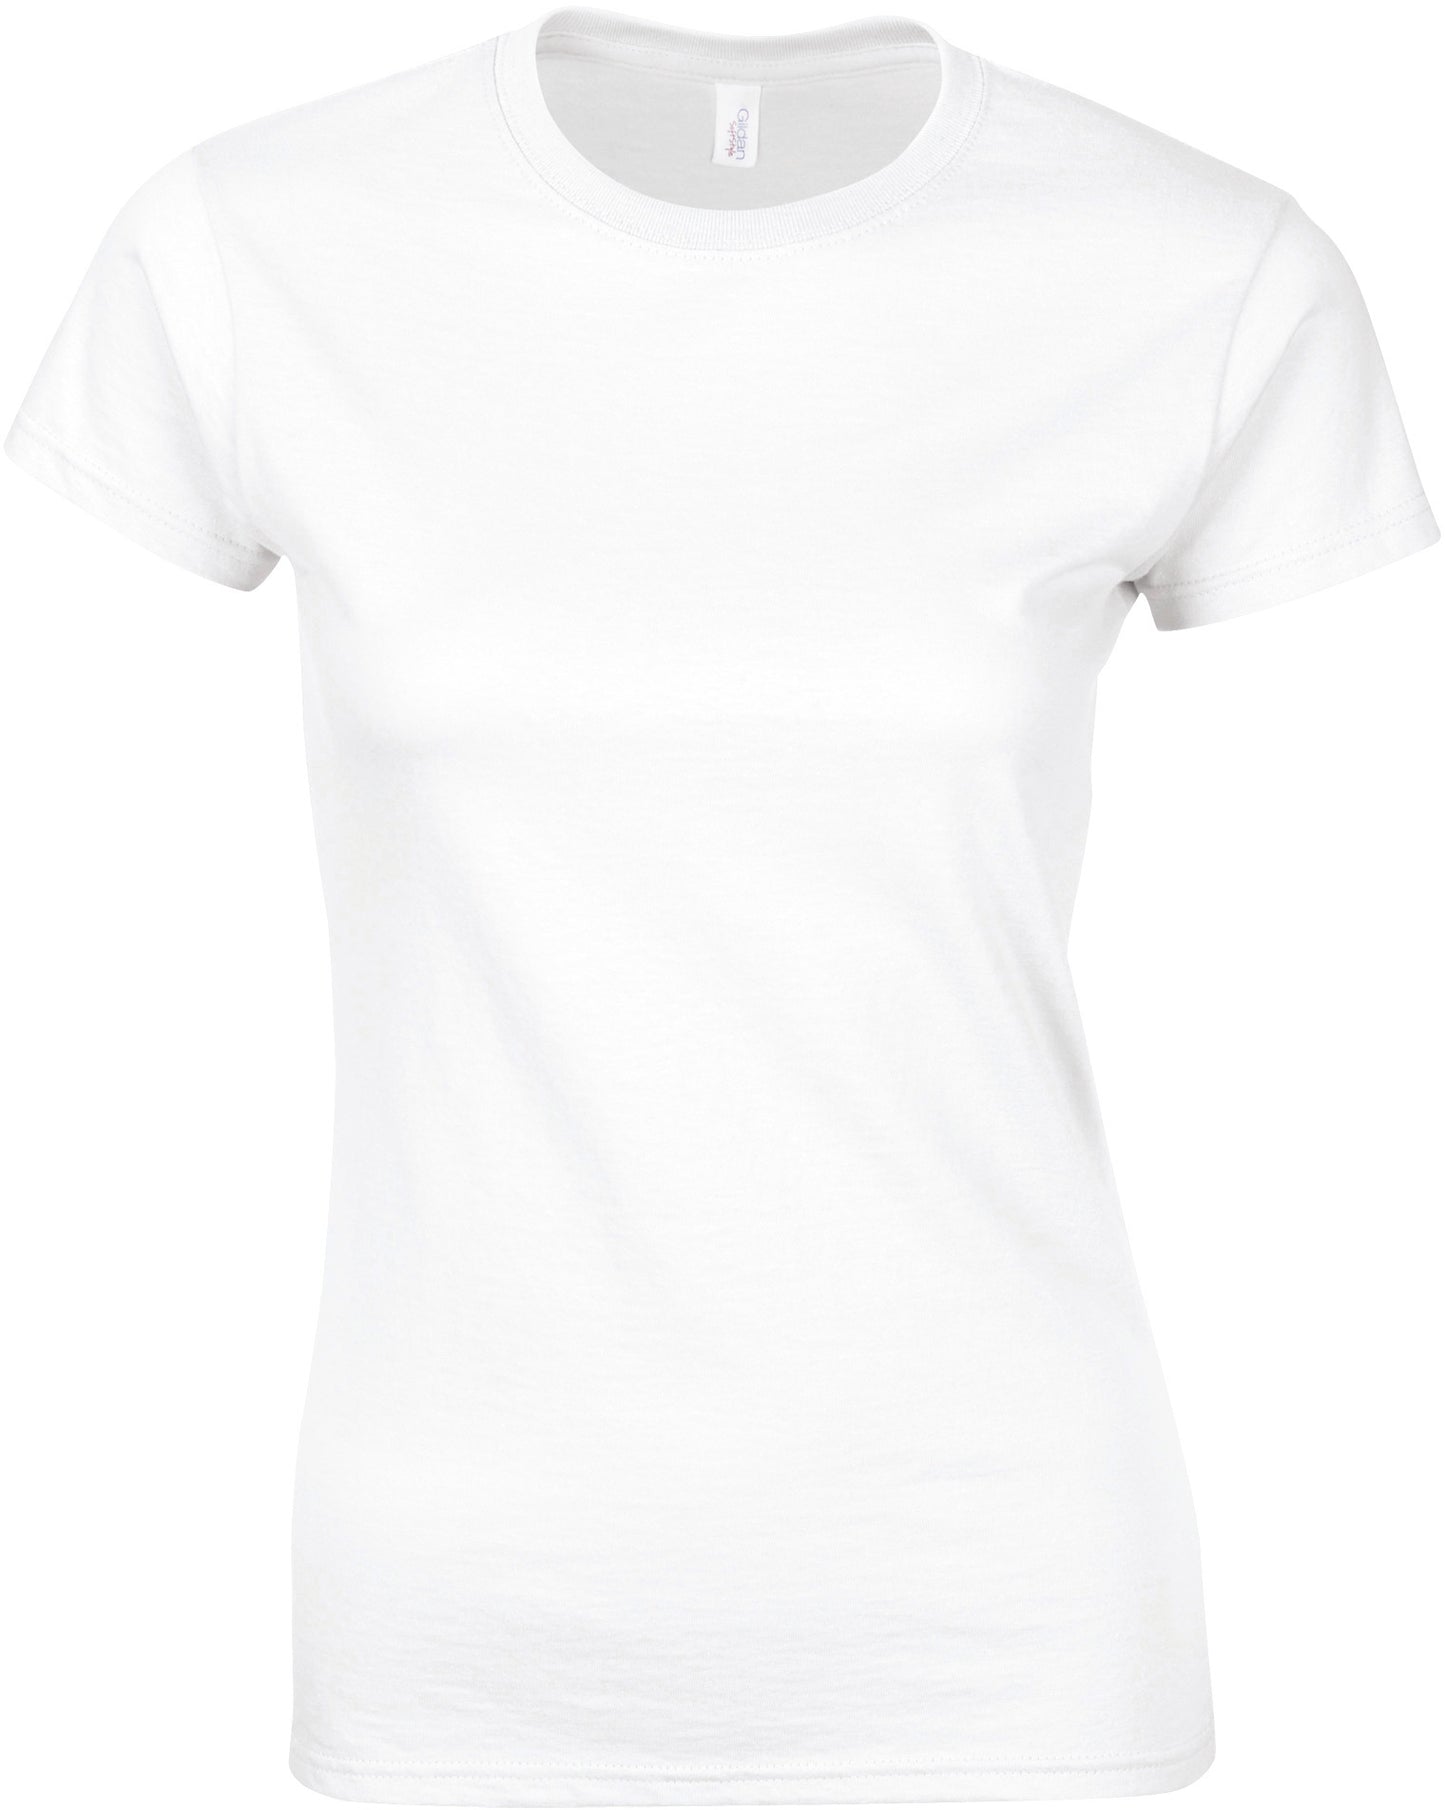 GI6400L - T-shirt femme col rond Softstyle